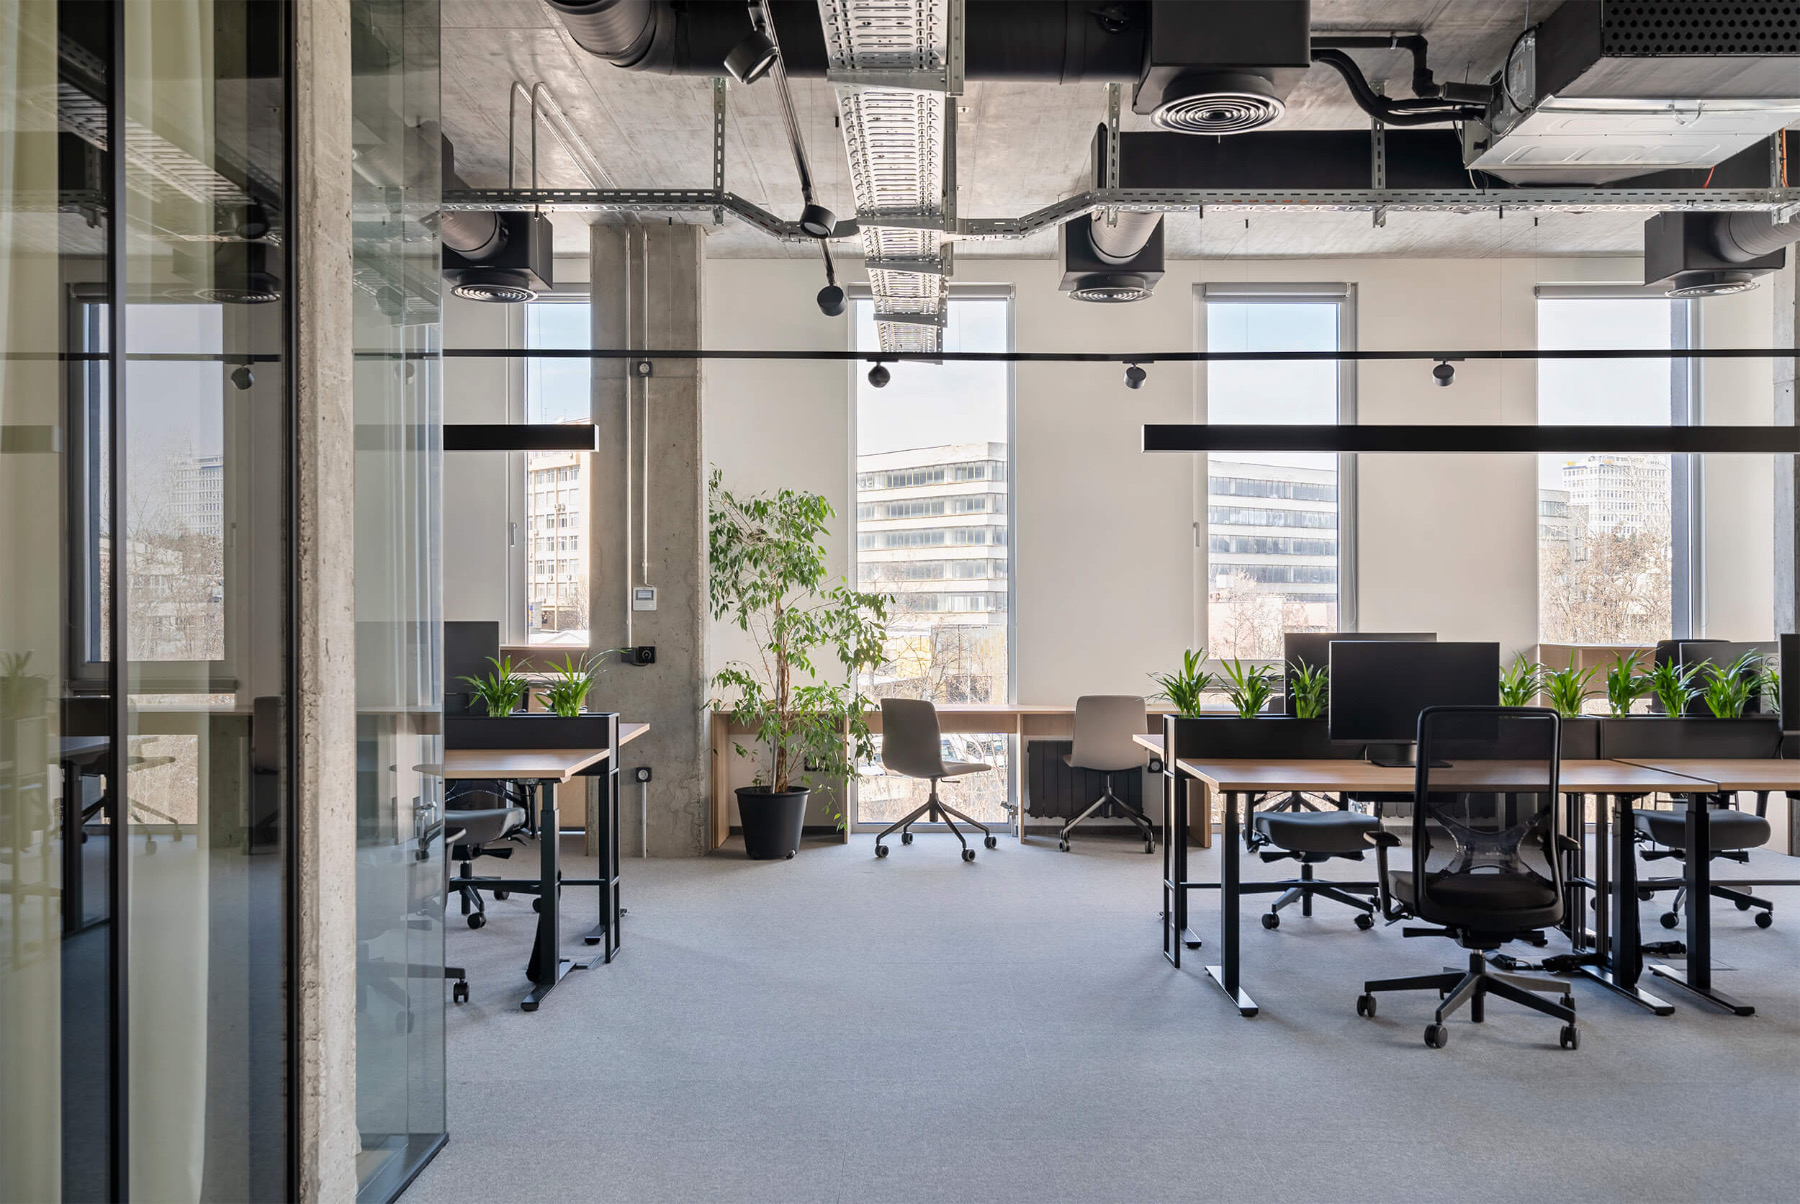 A Look Inside Hypoport’s New Sofia Office